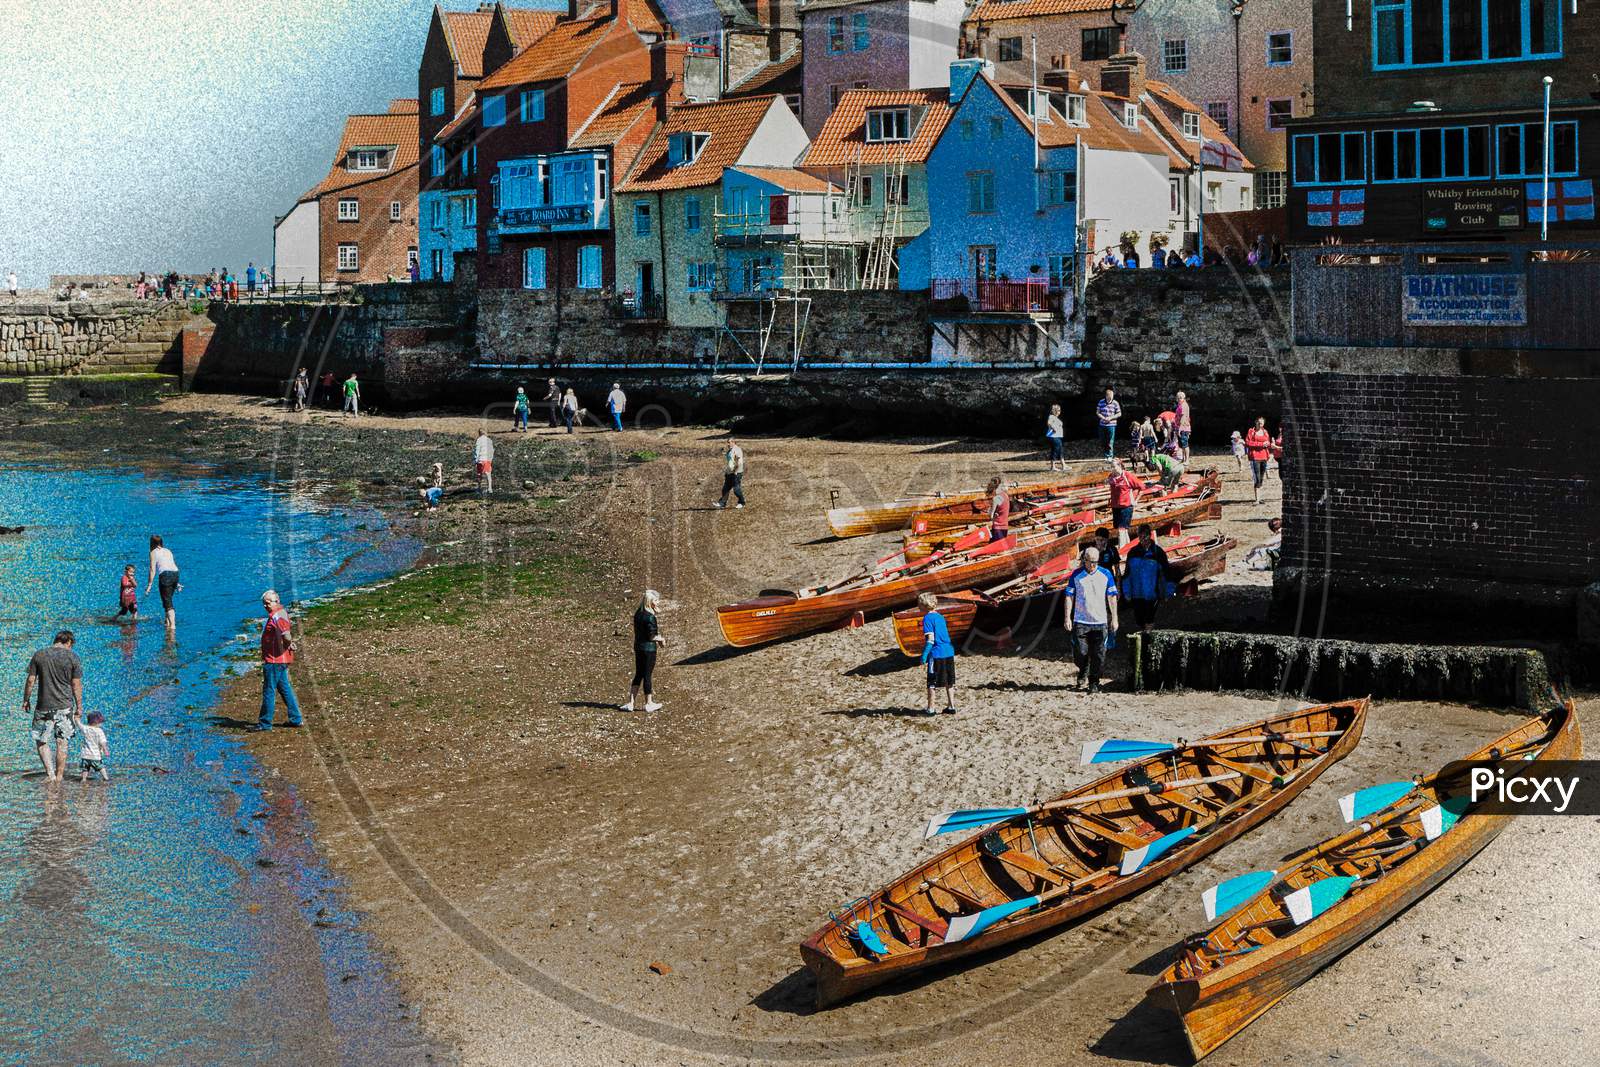 Rowing Boats Beached On The Sand At Whitby